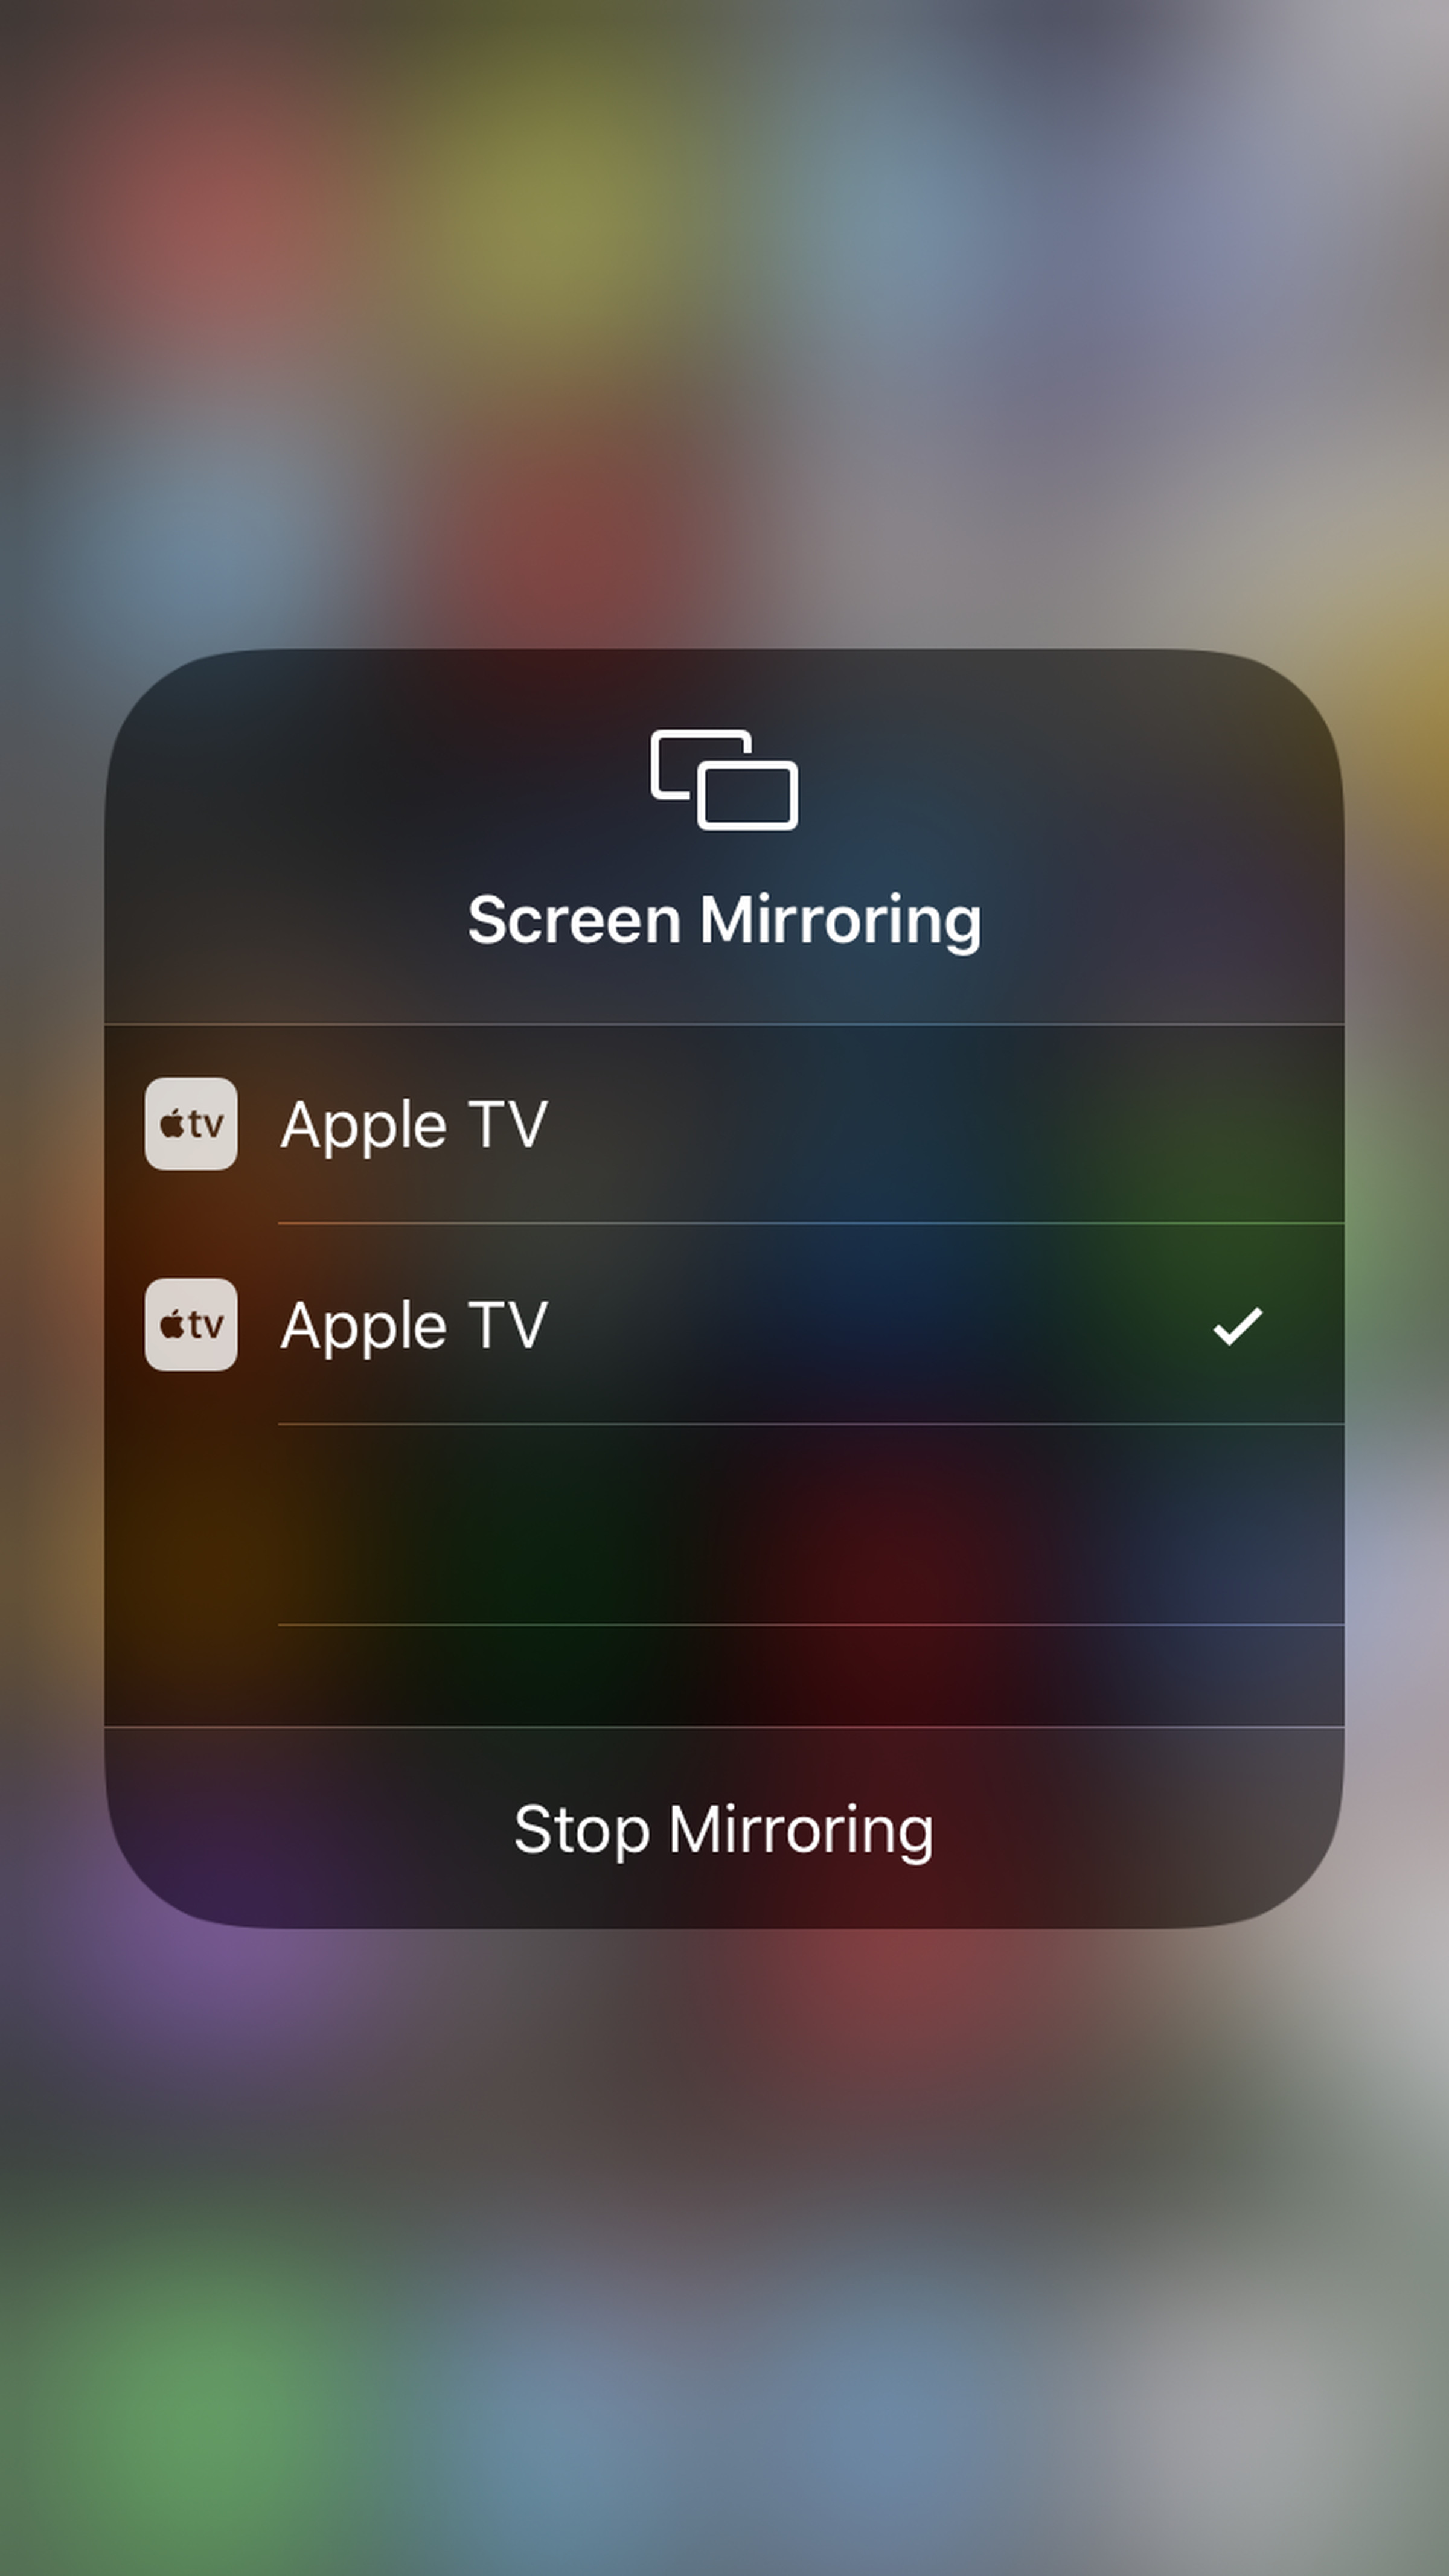 Tap “Stop Mirroring” to stop casting your phone screen to your TV.